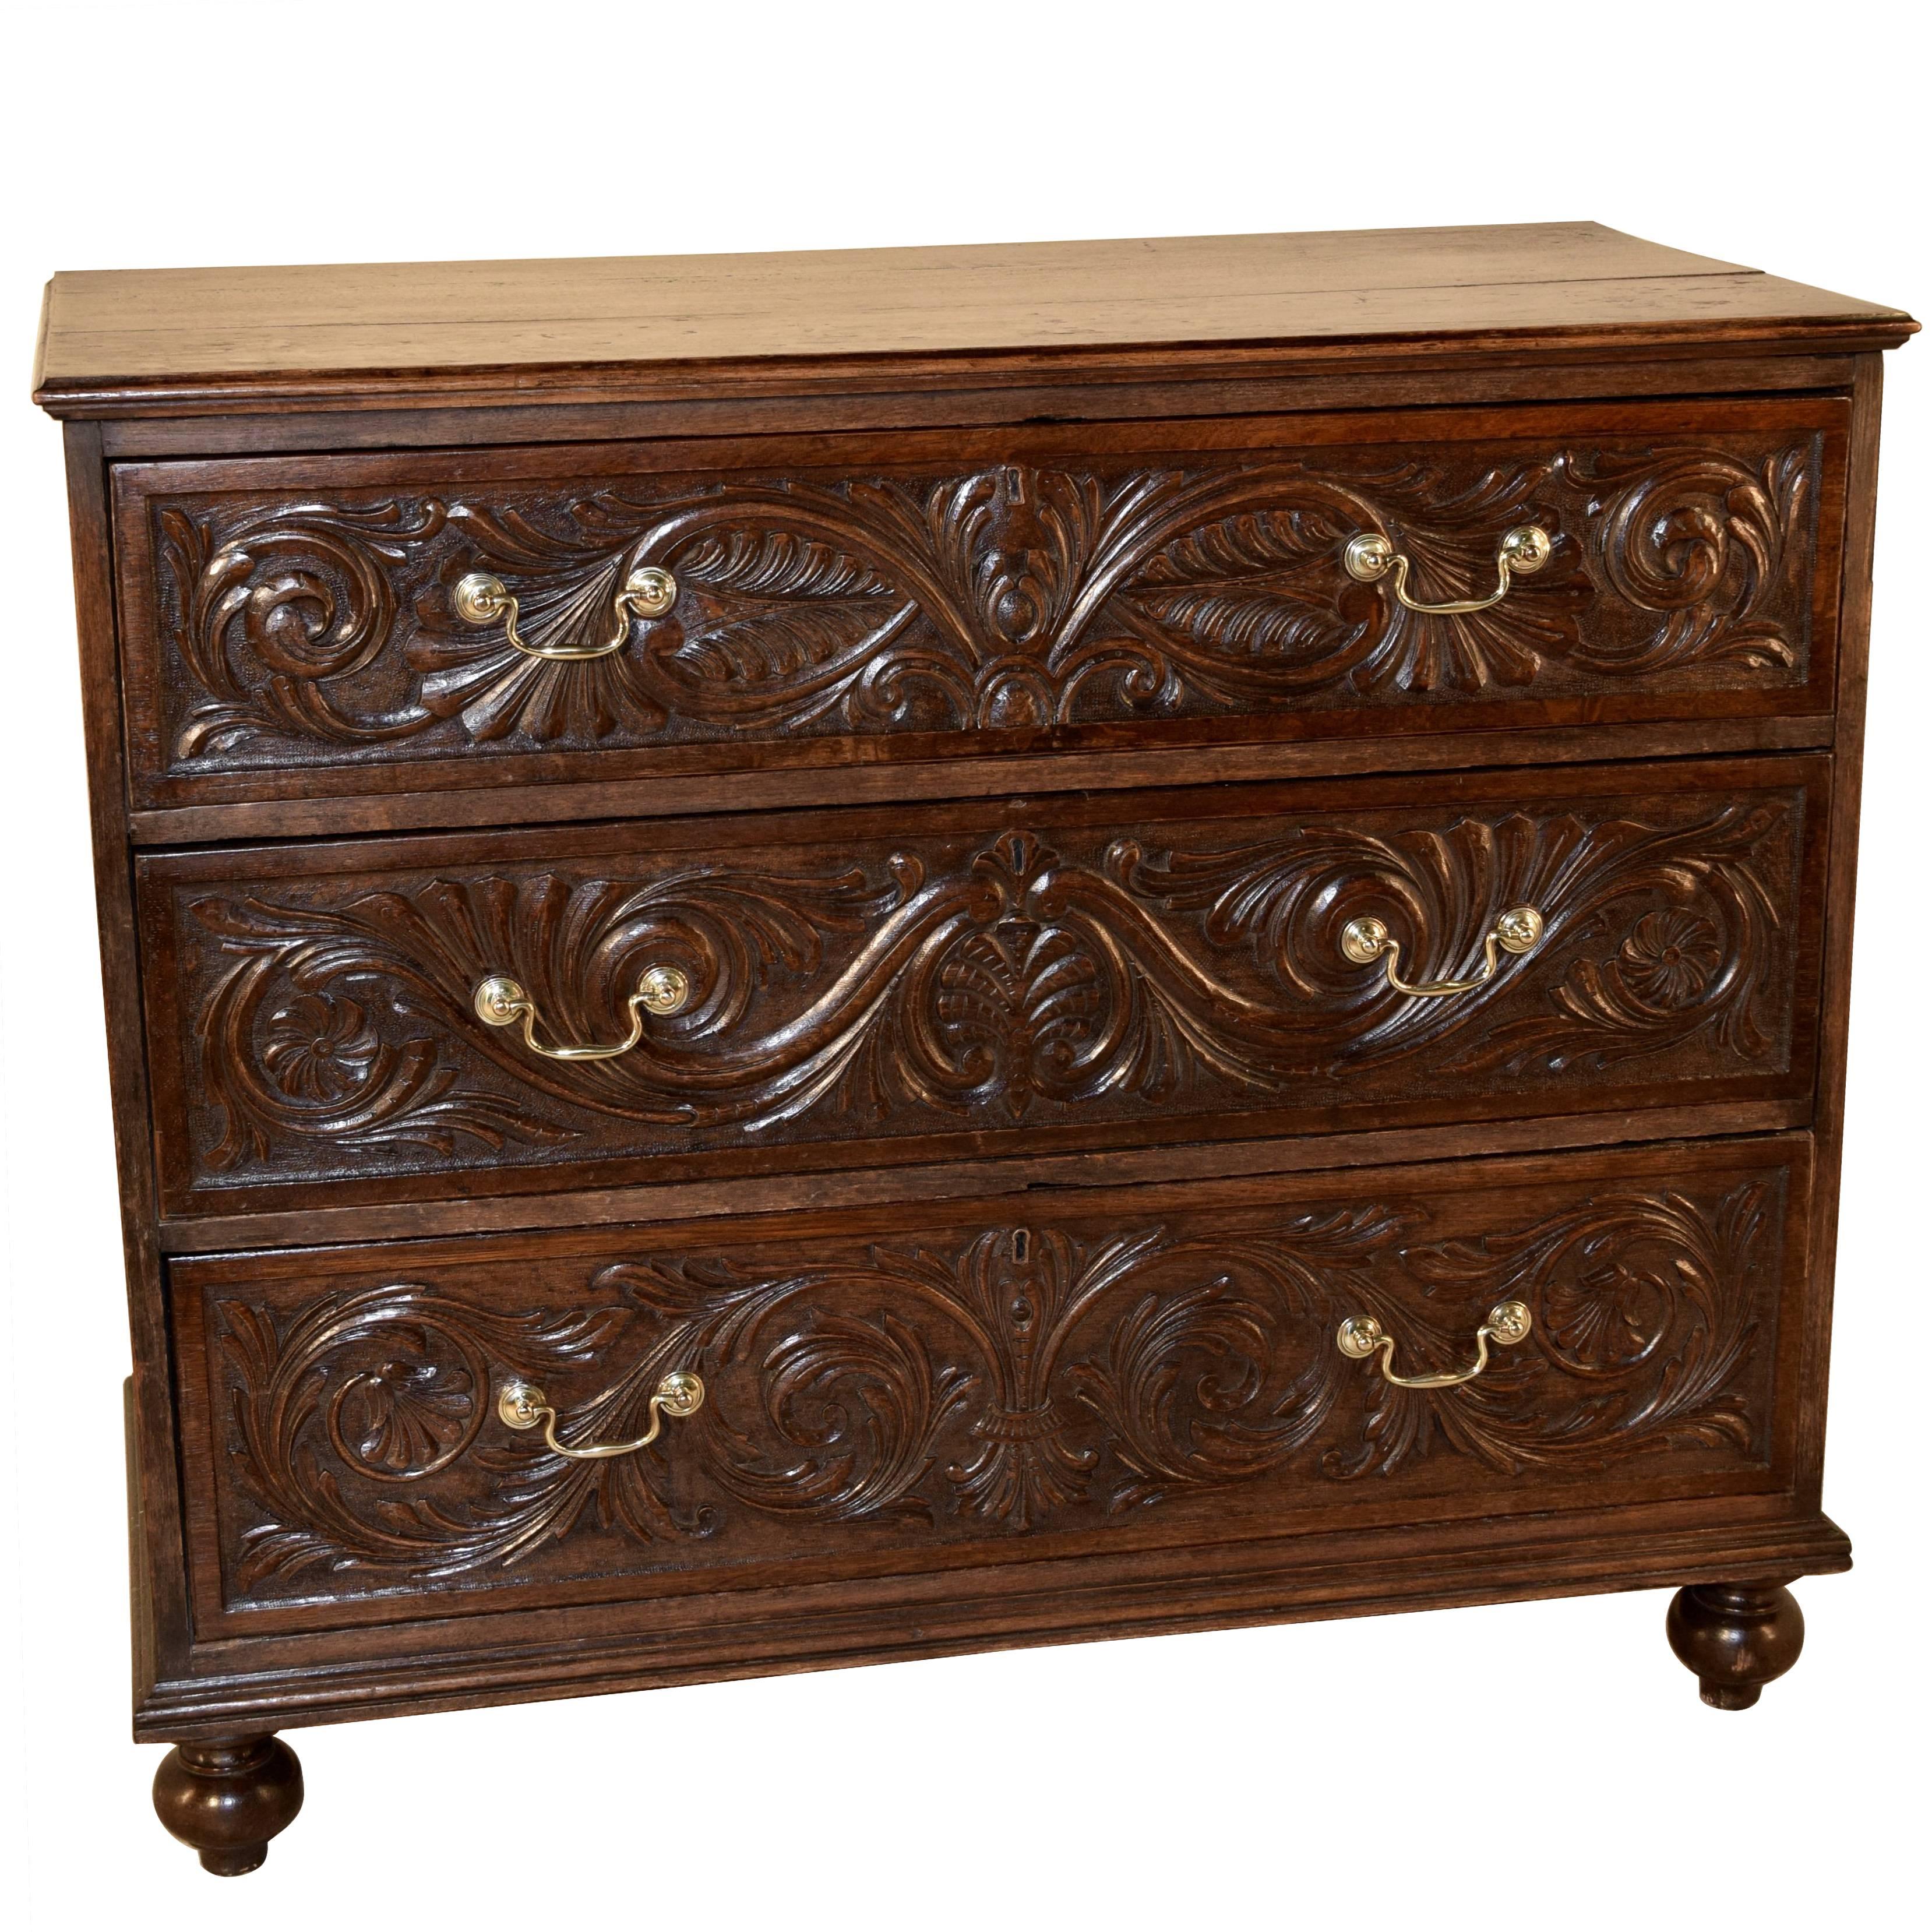 Early 19th Century English Oak Carved Chest of Drawers